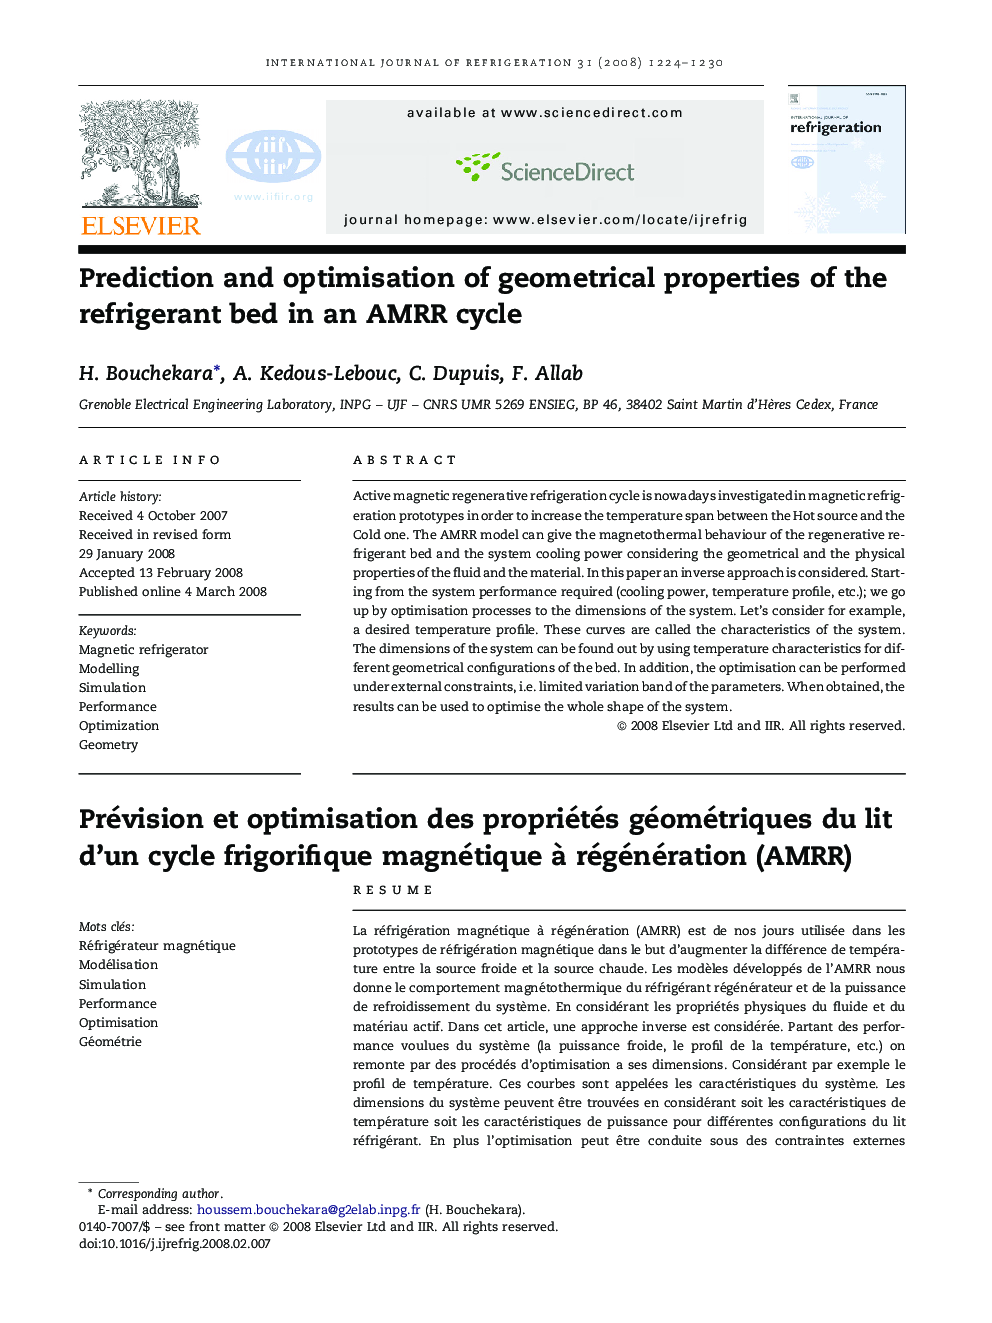 Prediction and optimisation of geometrical properties of the refrigerant bed in an AMRR cycle